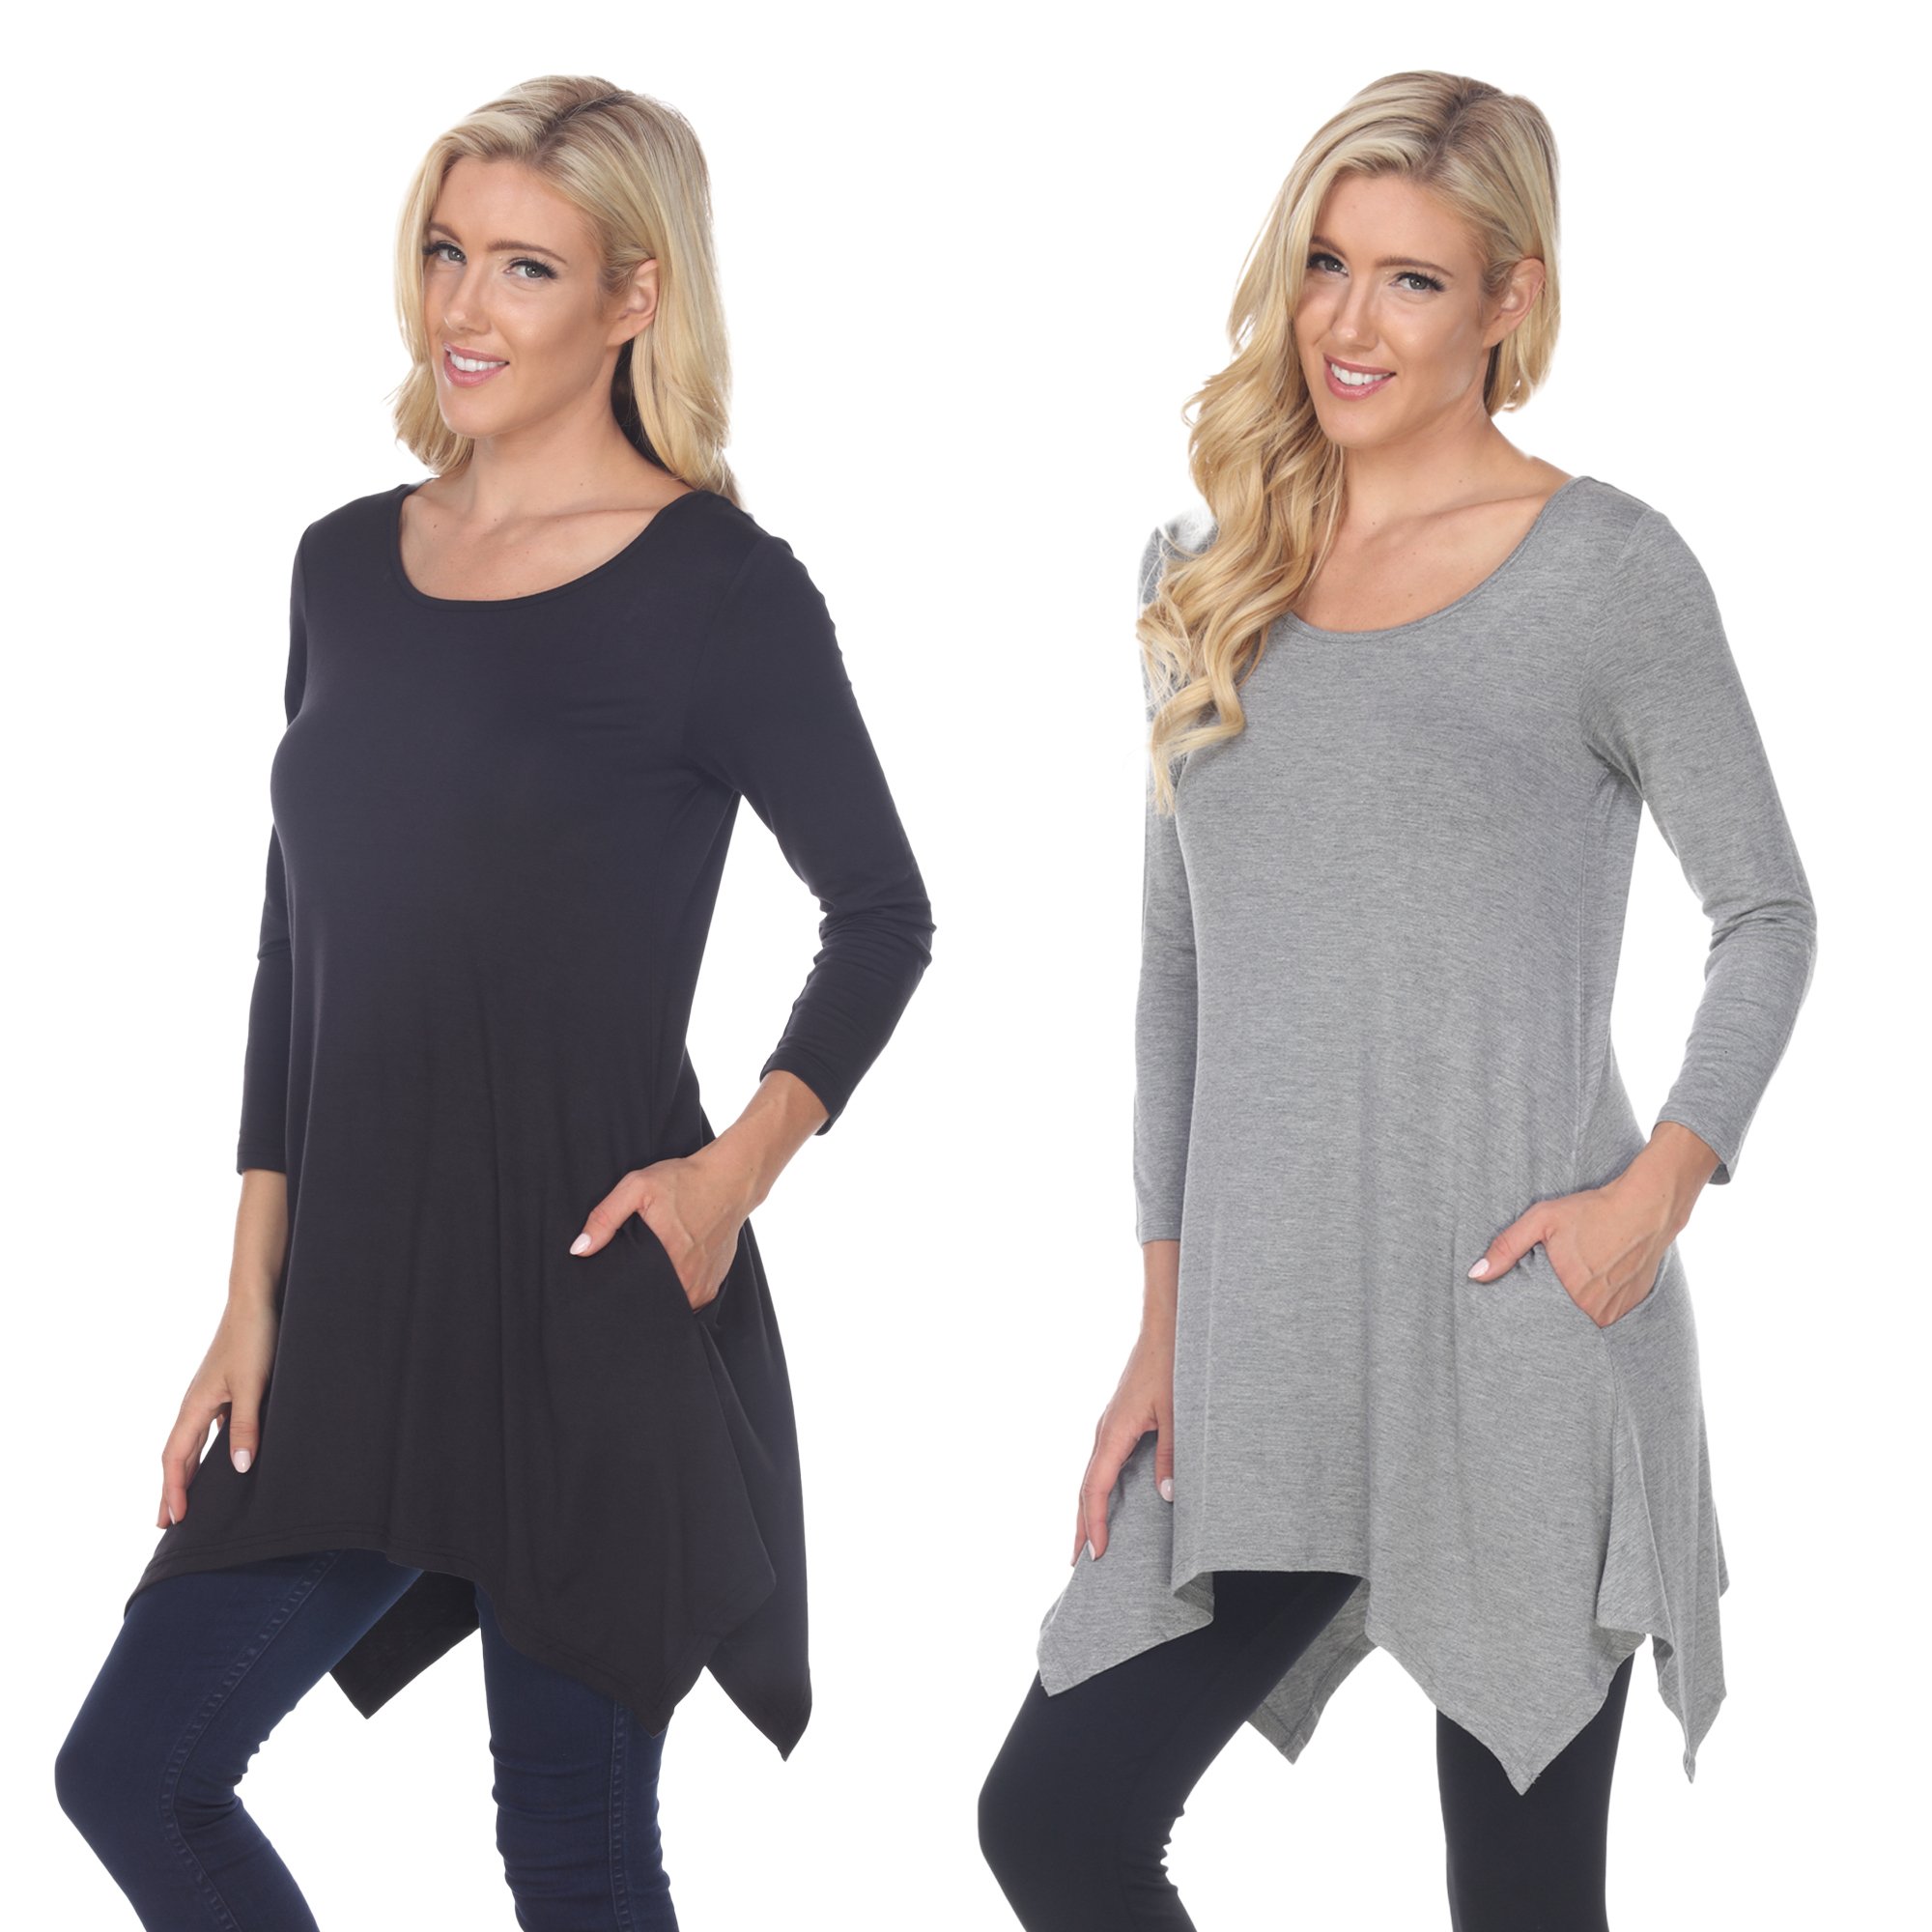 White Mark Women's Pack Of 2 Black Tunic Top - Black, Charcoal, Large